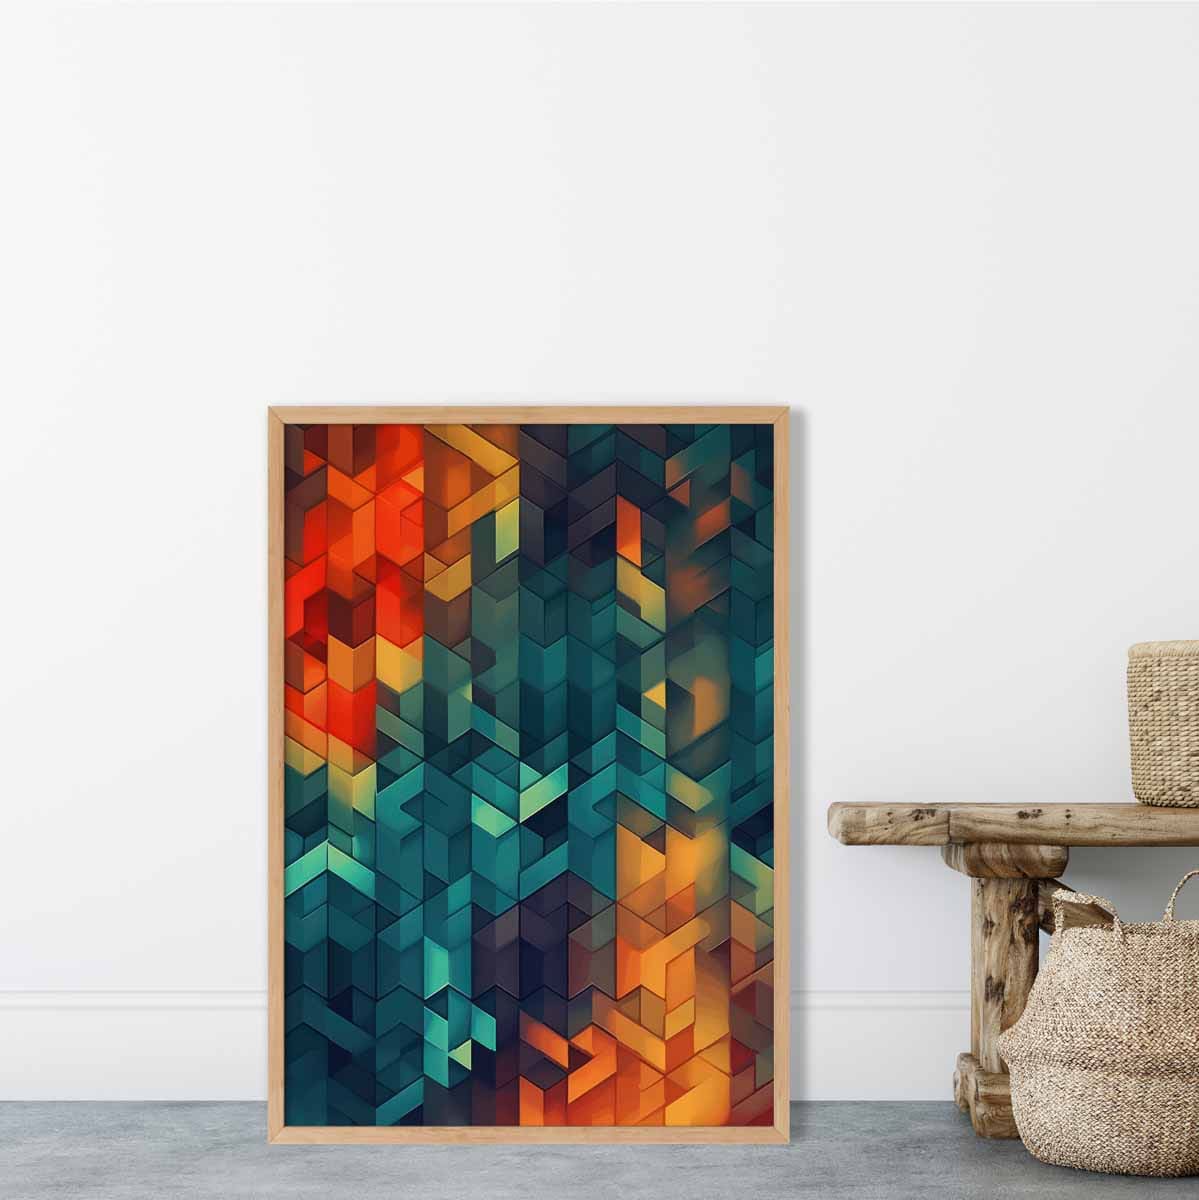 Abstract Geometric Shapes Art Print Blue Orange and Red No 3